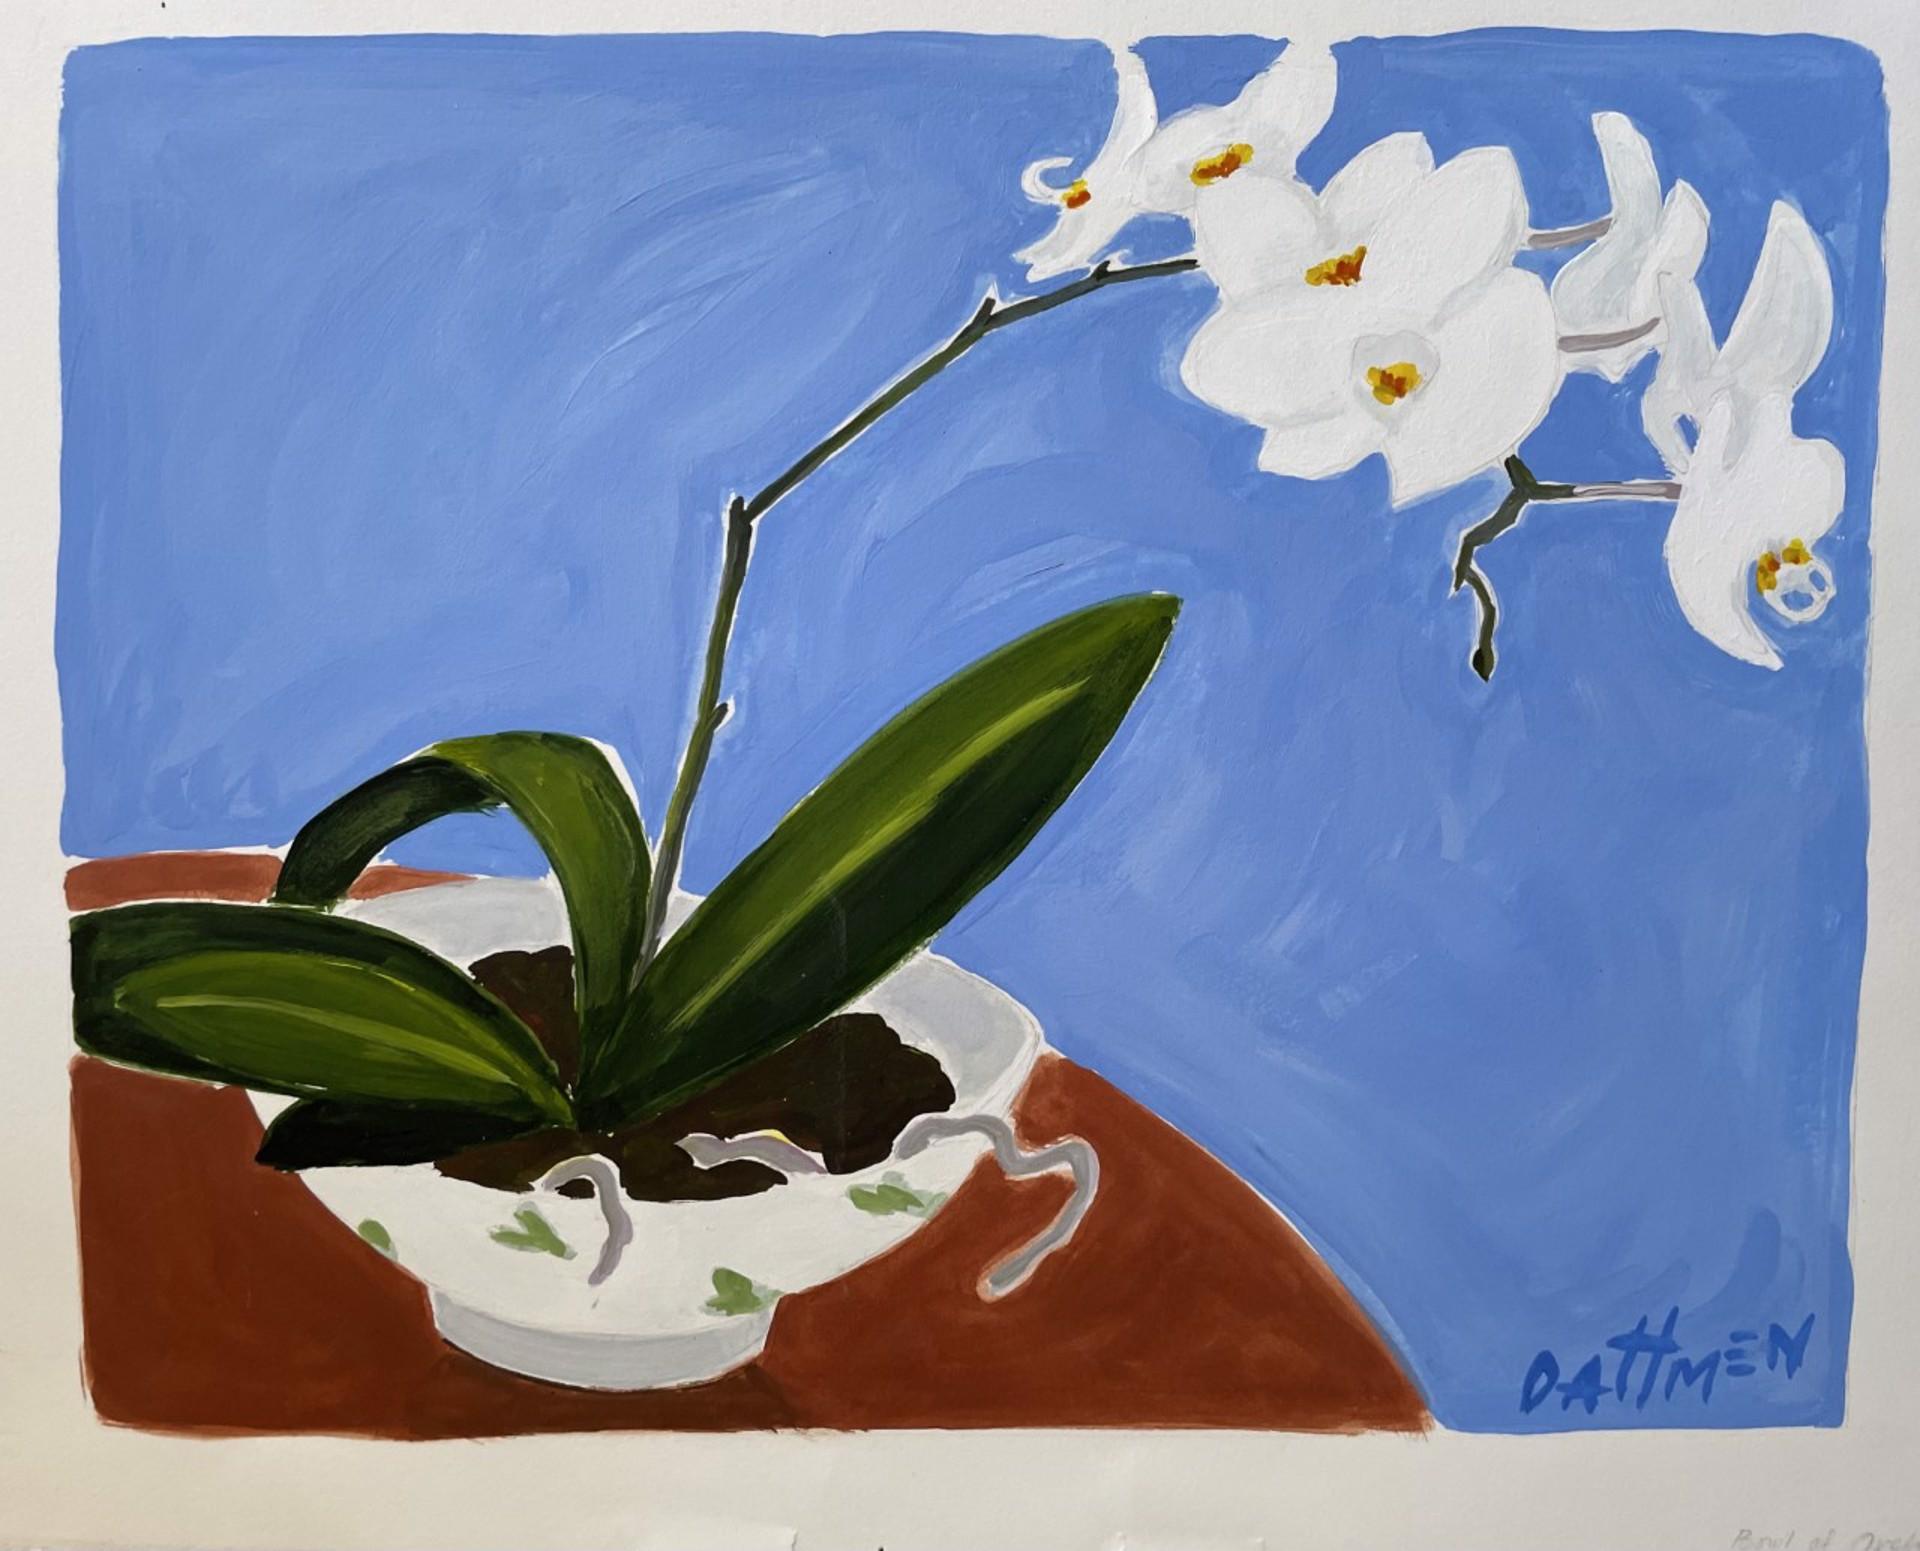 Bowl with Orchid - Art by Jane Dahmen